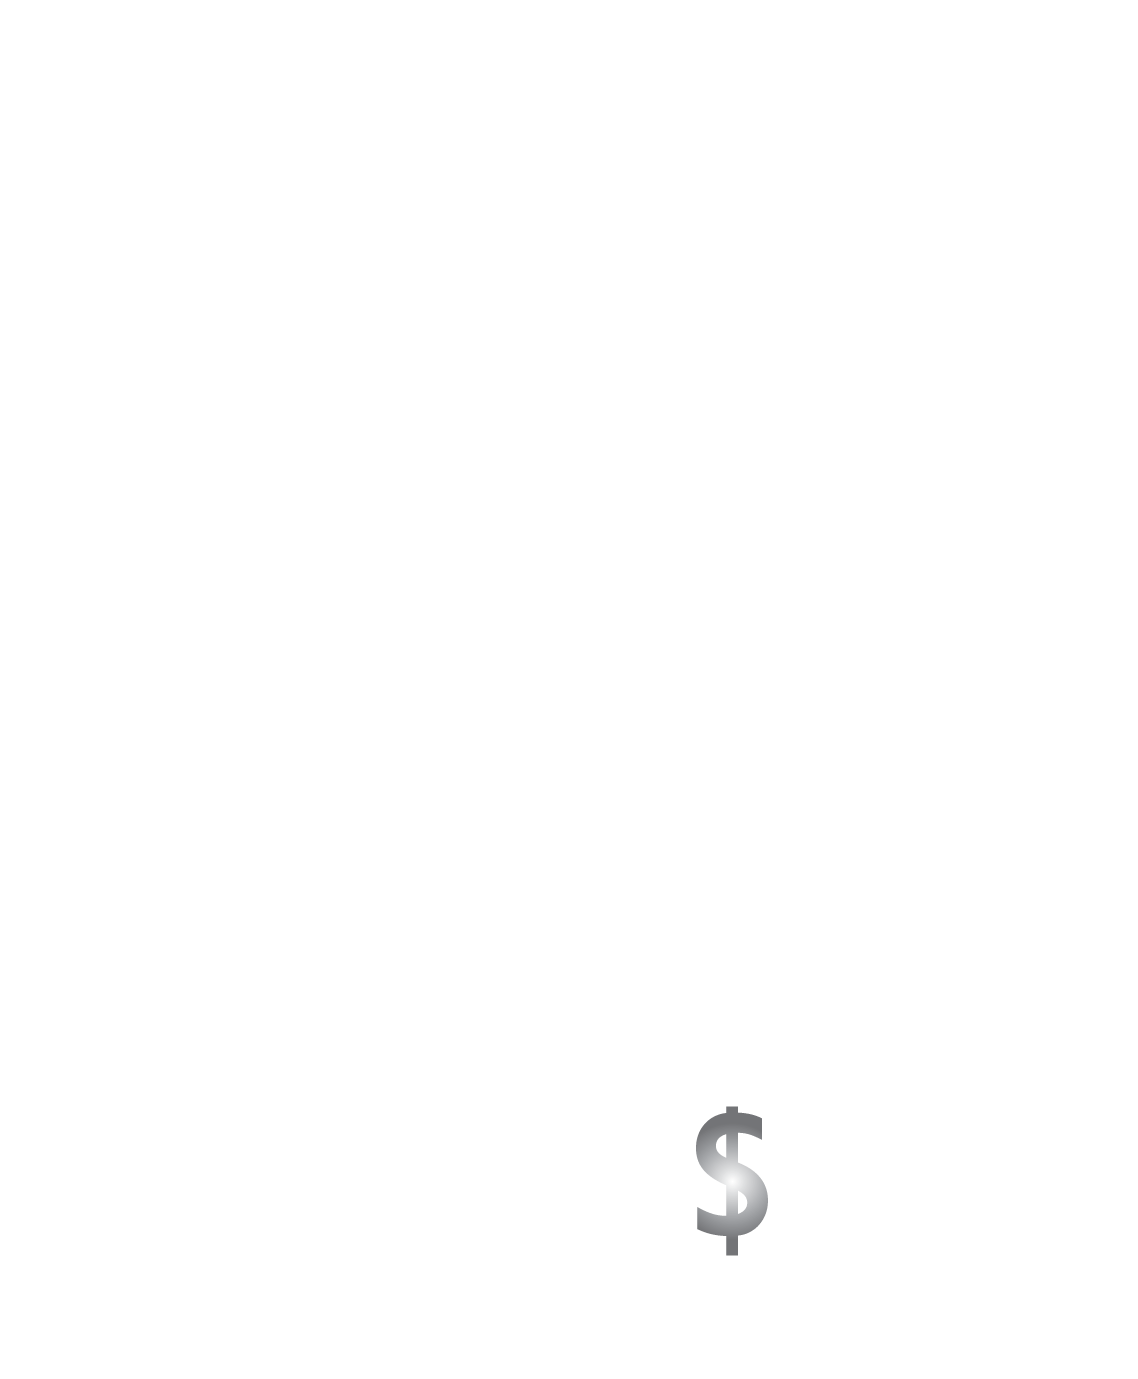 Centennial top fifty research colleges according to 2021 research infosource inc